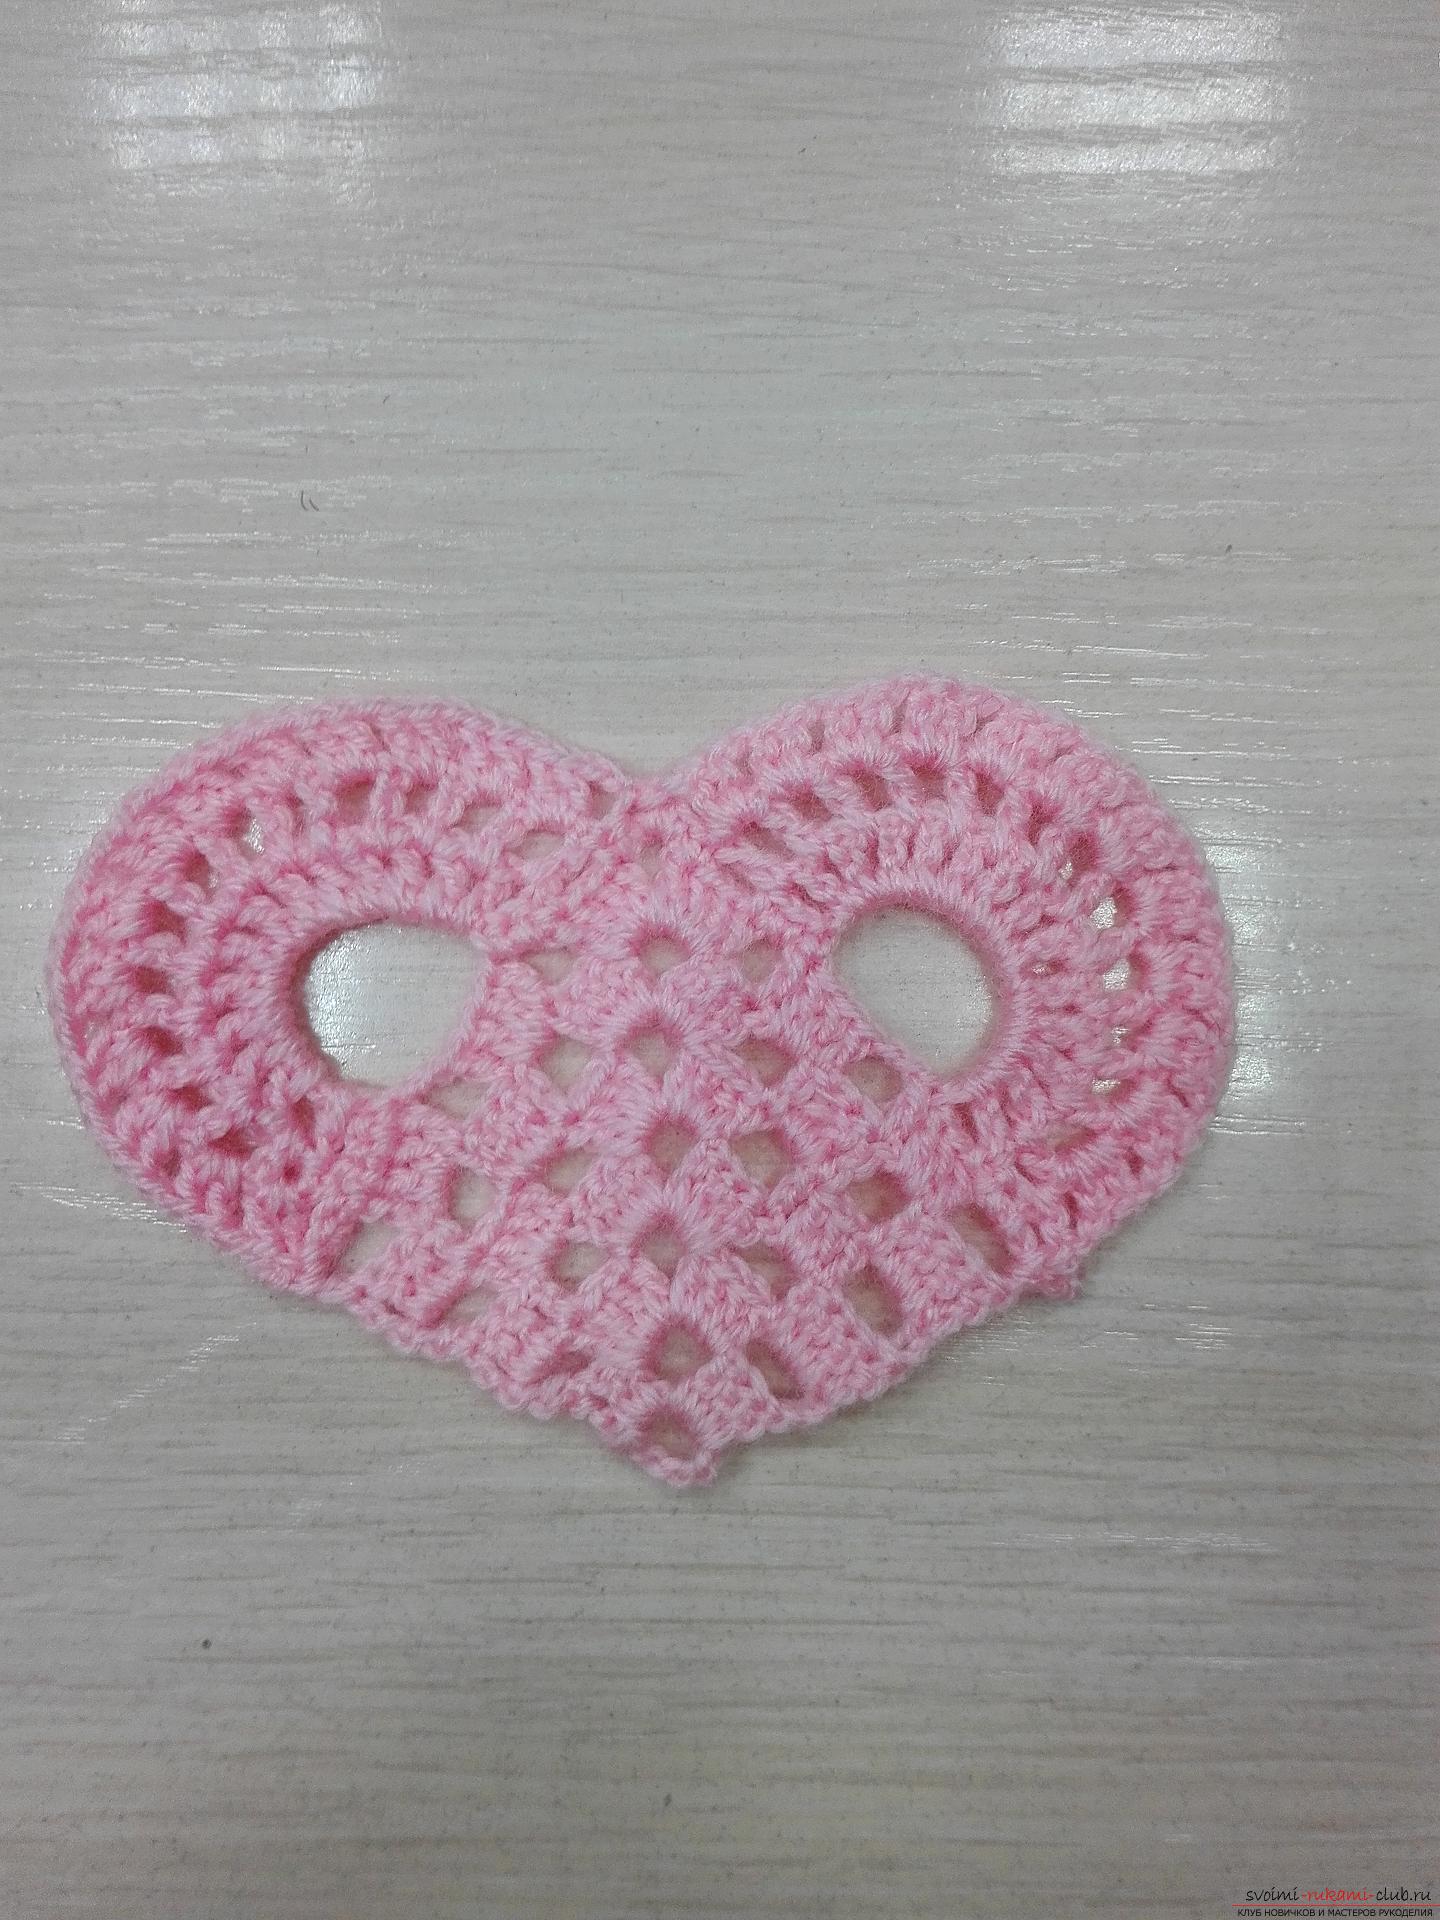 This master class on knitting is designed by the lover - he will teach how to tie the heart crochet. Photo №1